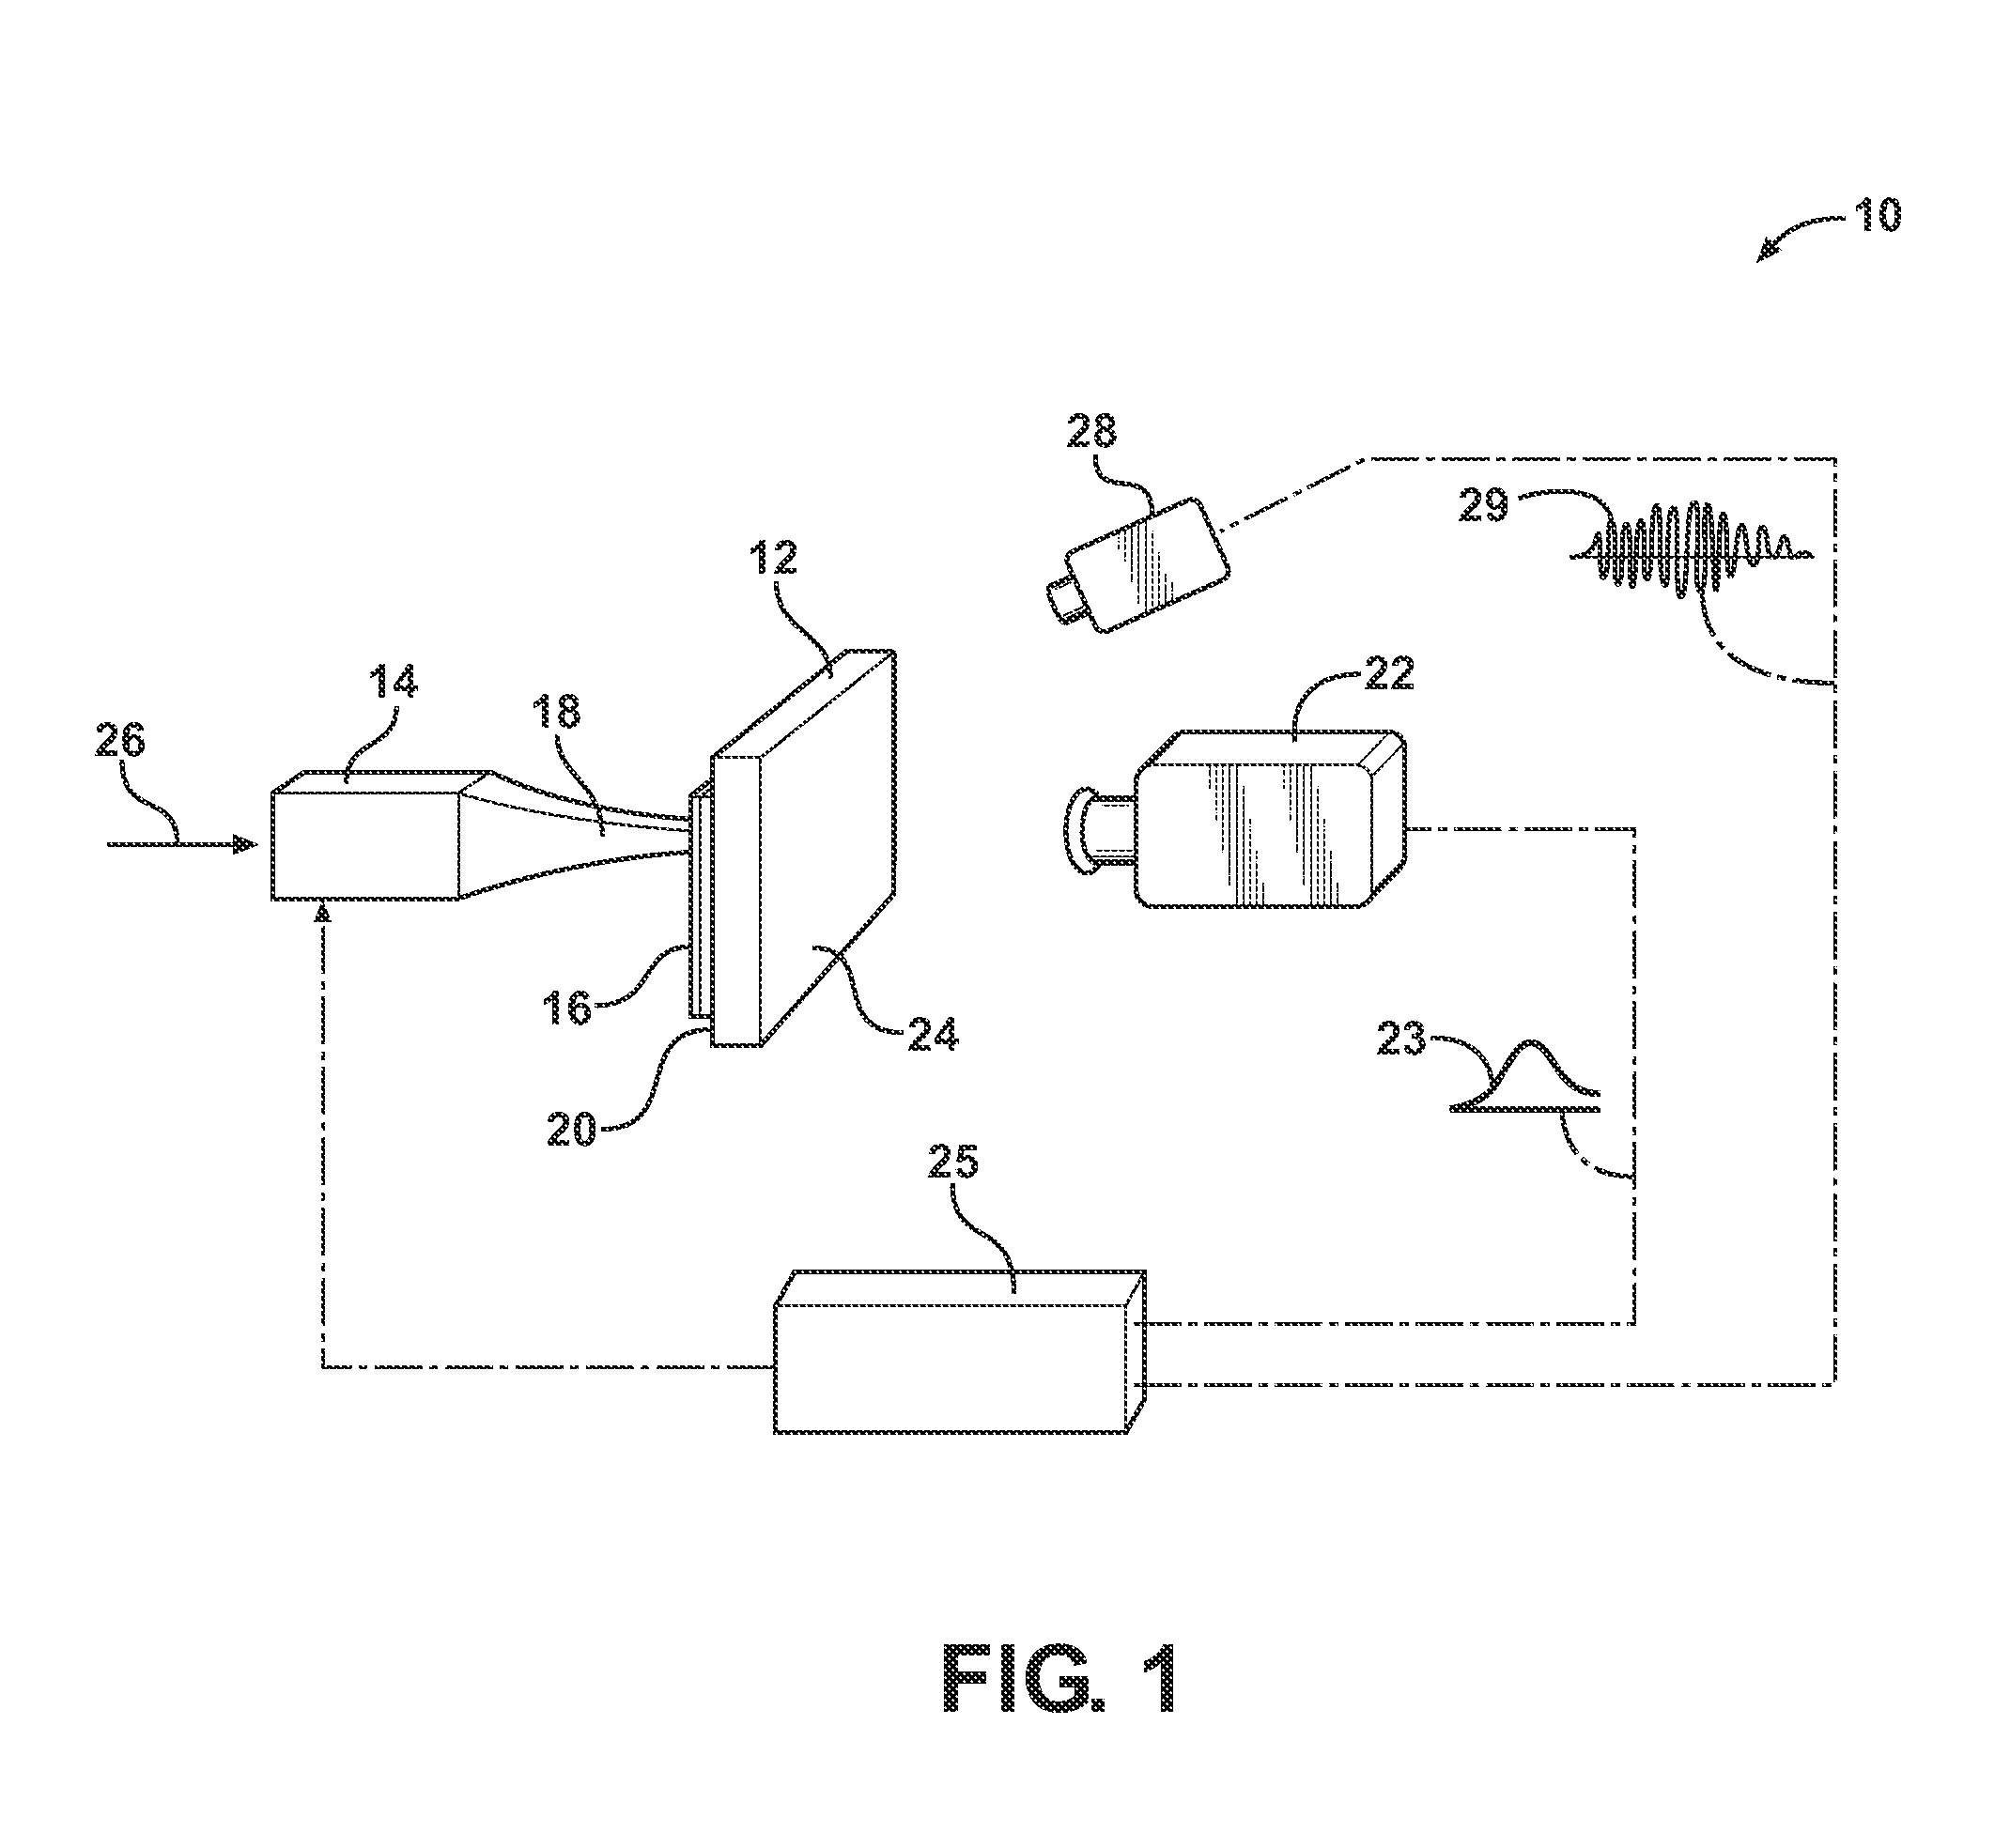 System and Method for Analysis of Ultrasonic Power Coupling During Acoustic Thermography